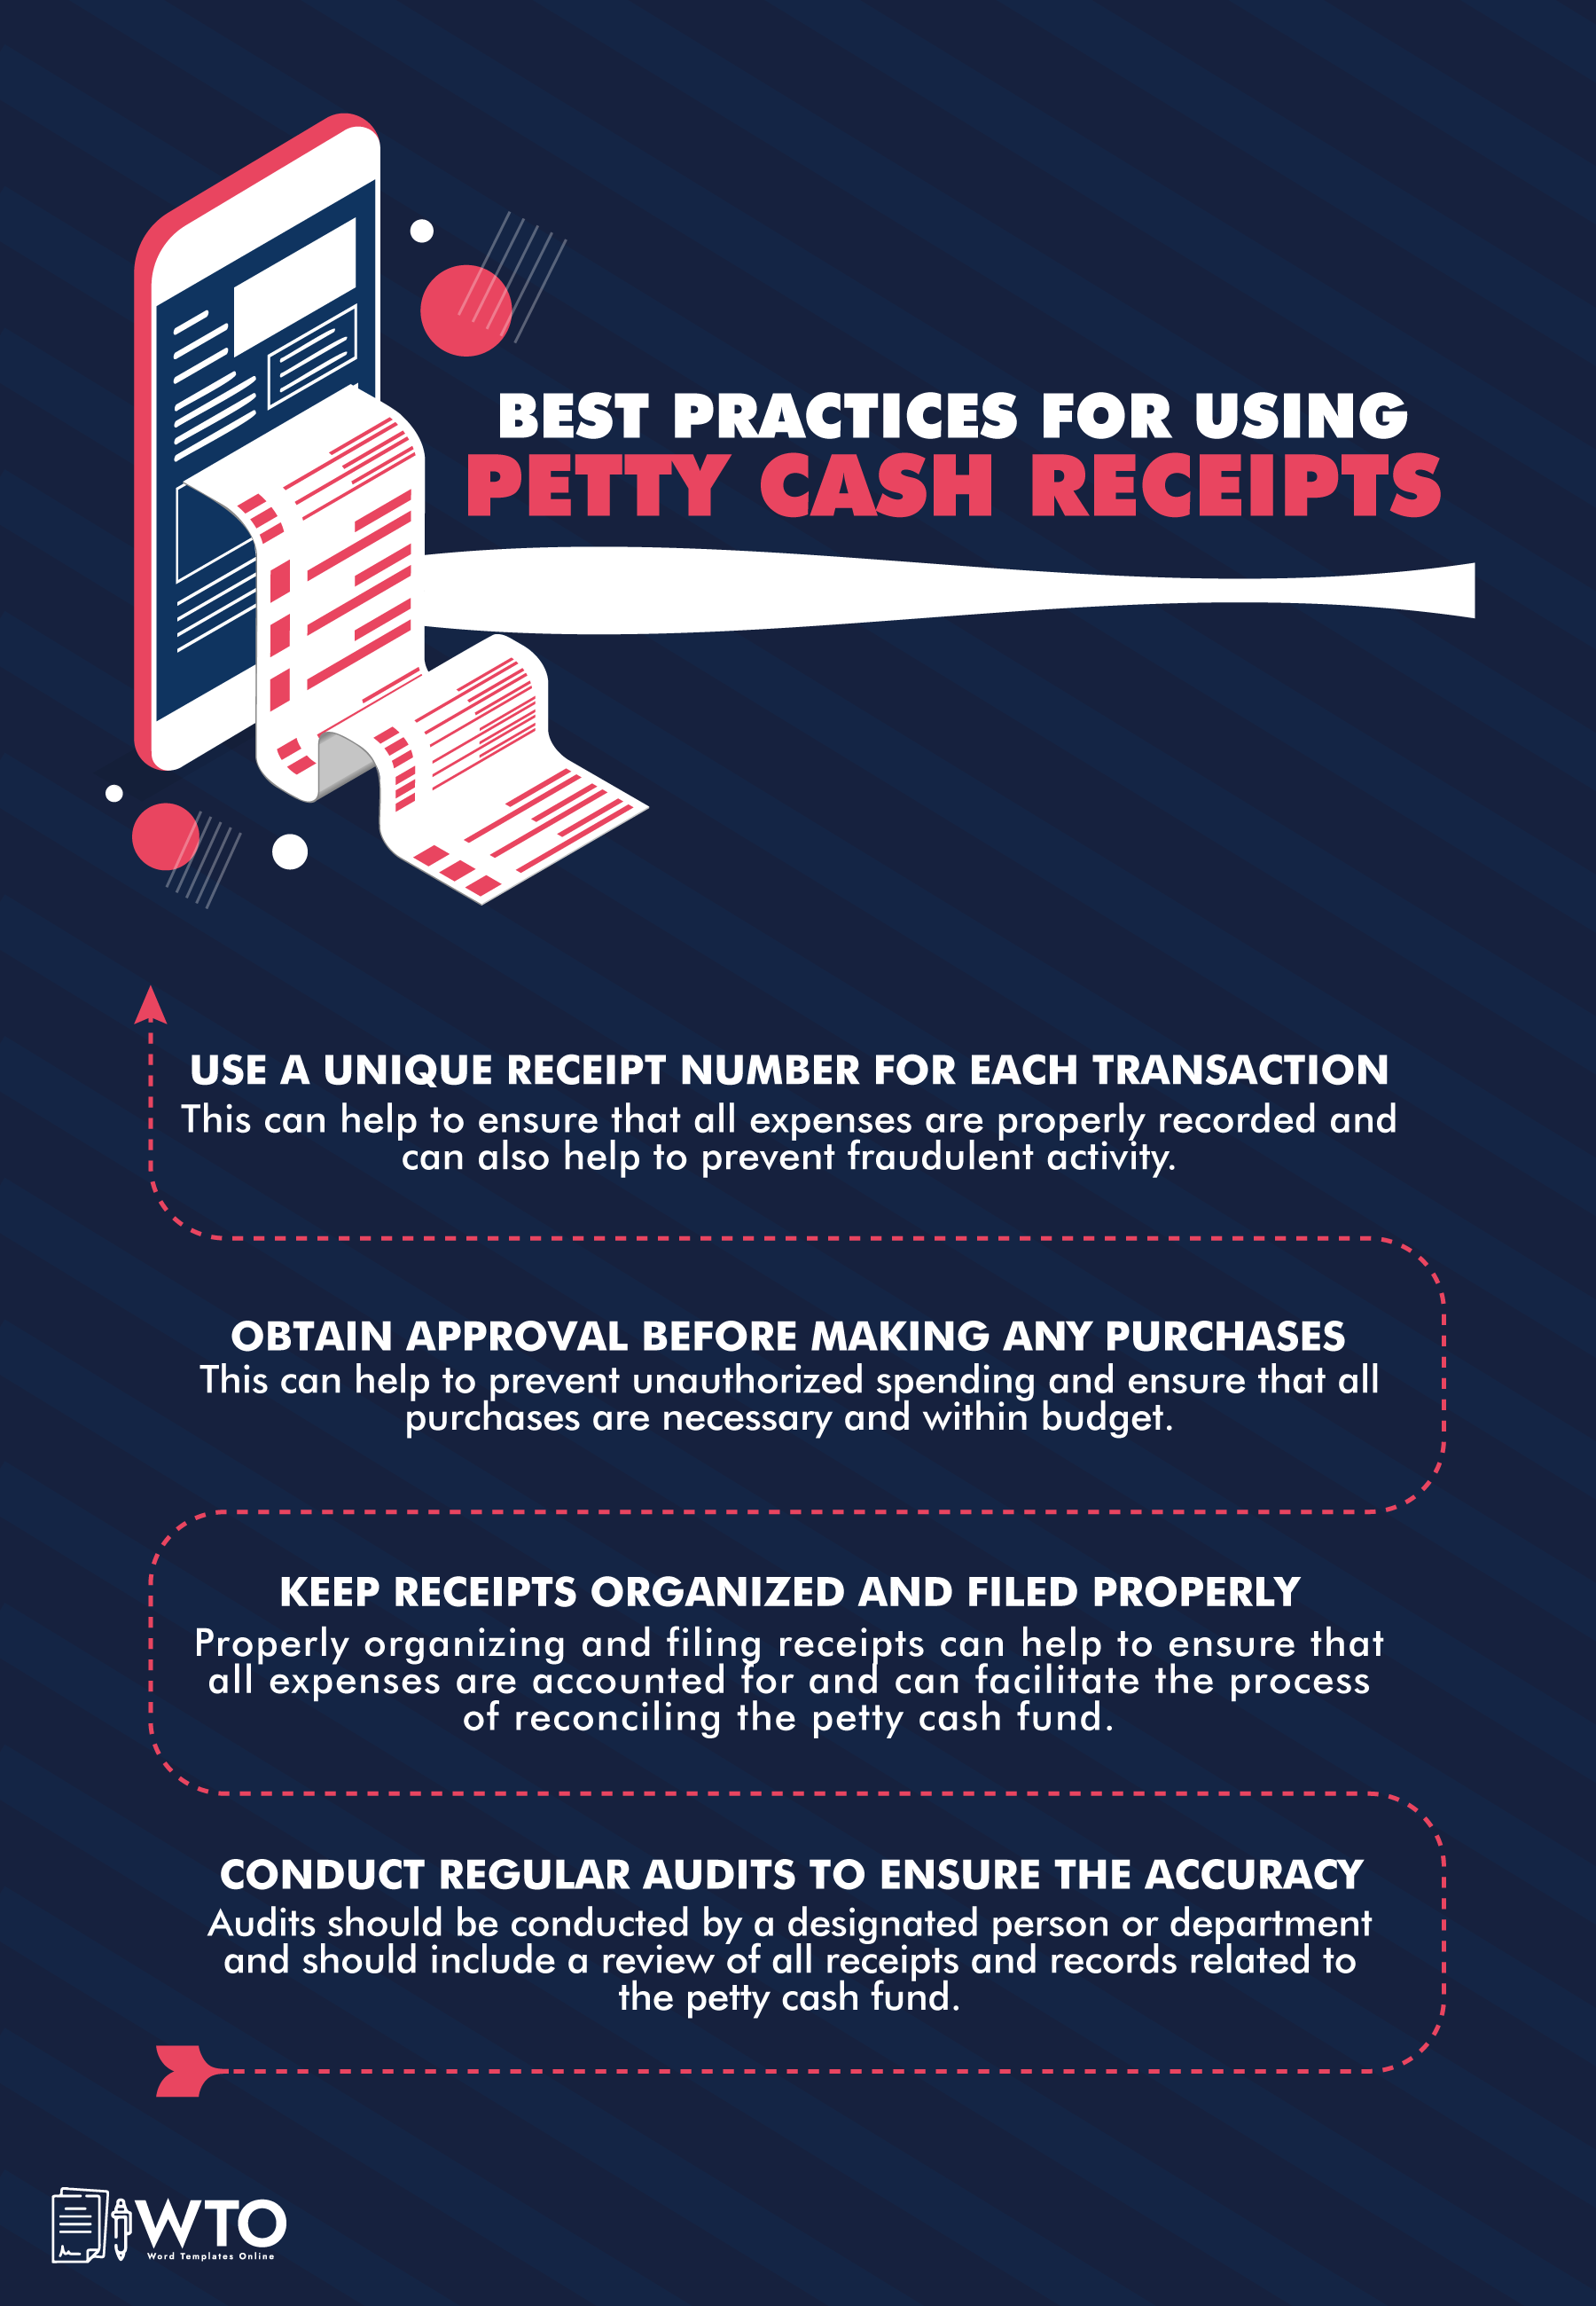 This infographic is about best practices to use petty cash receipts.